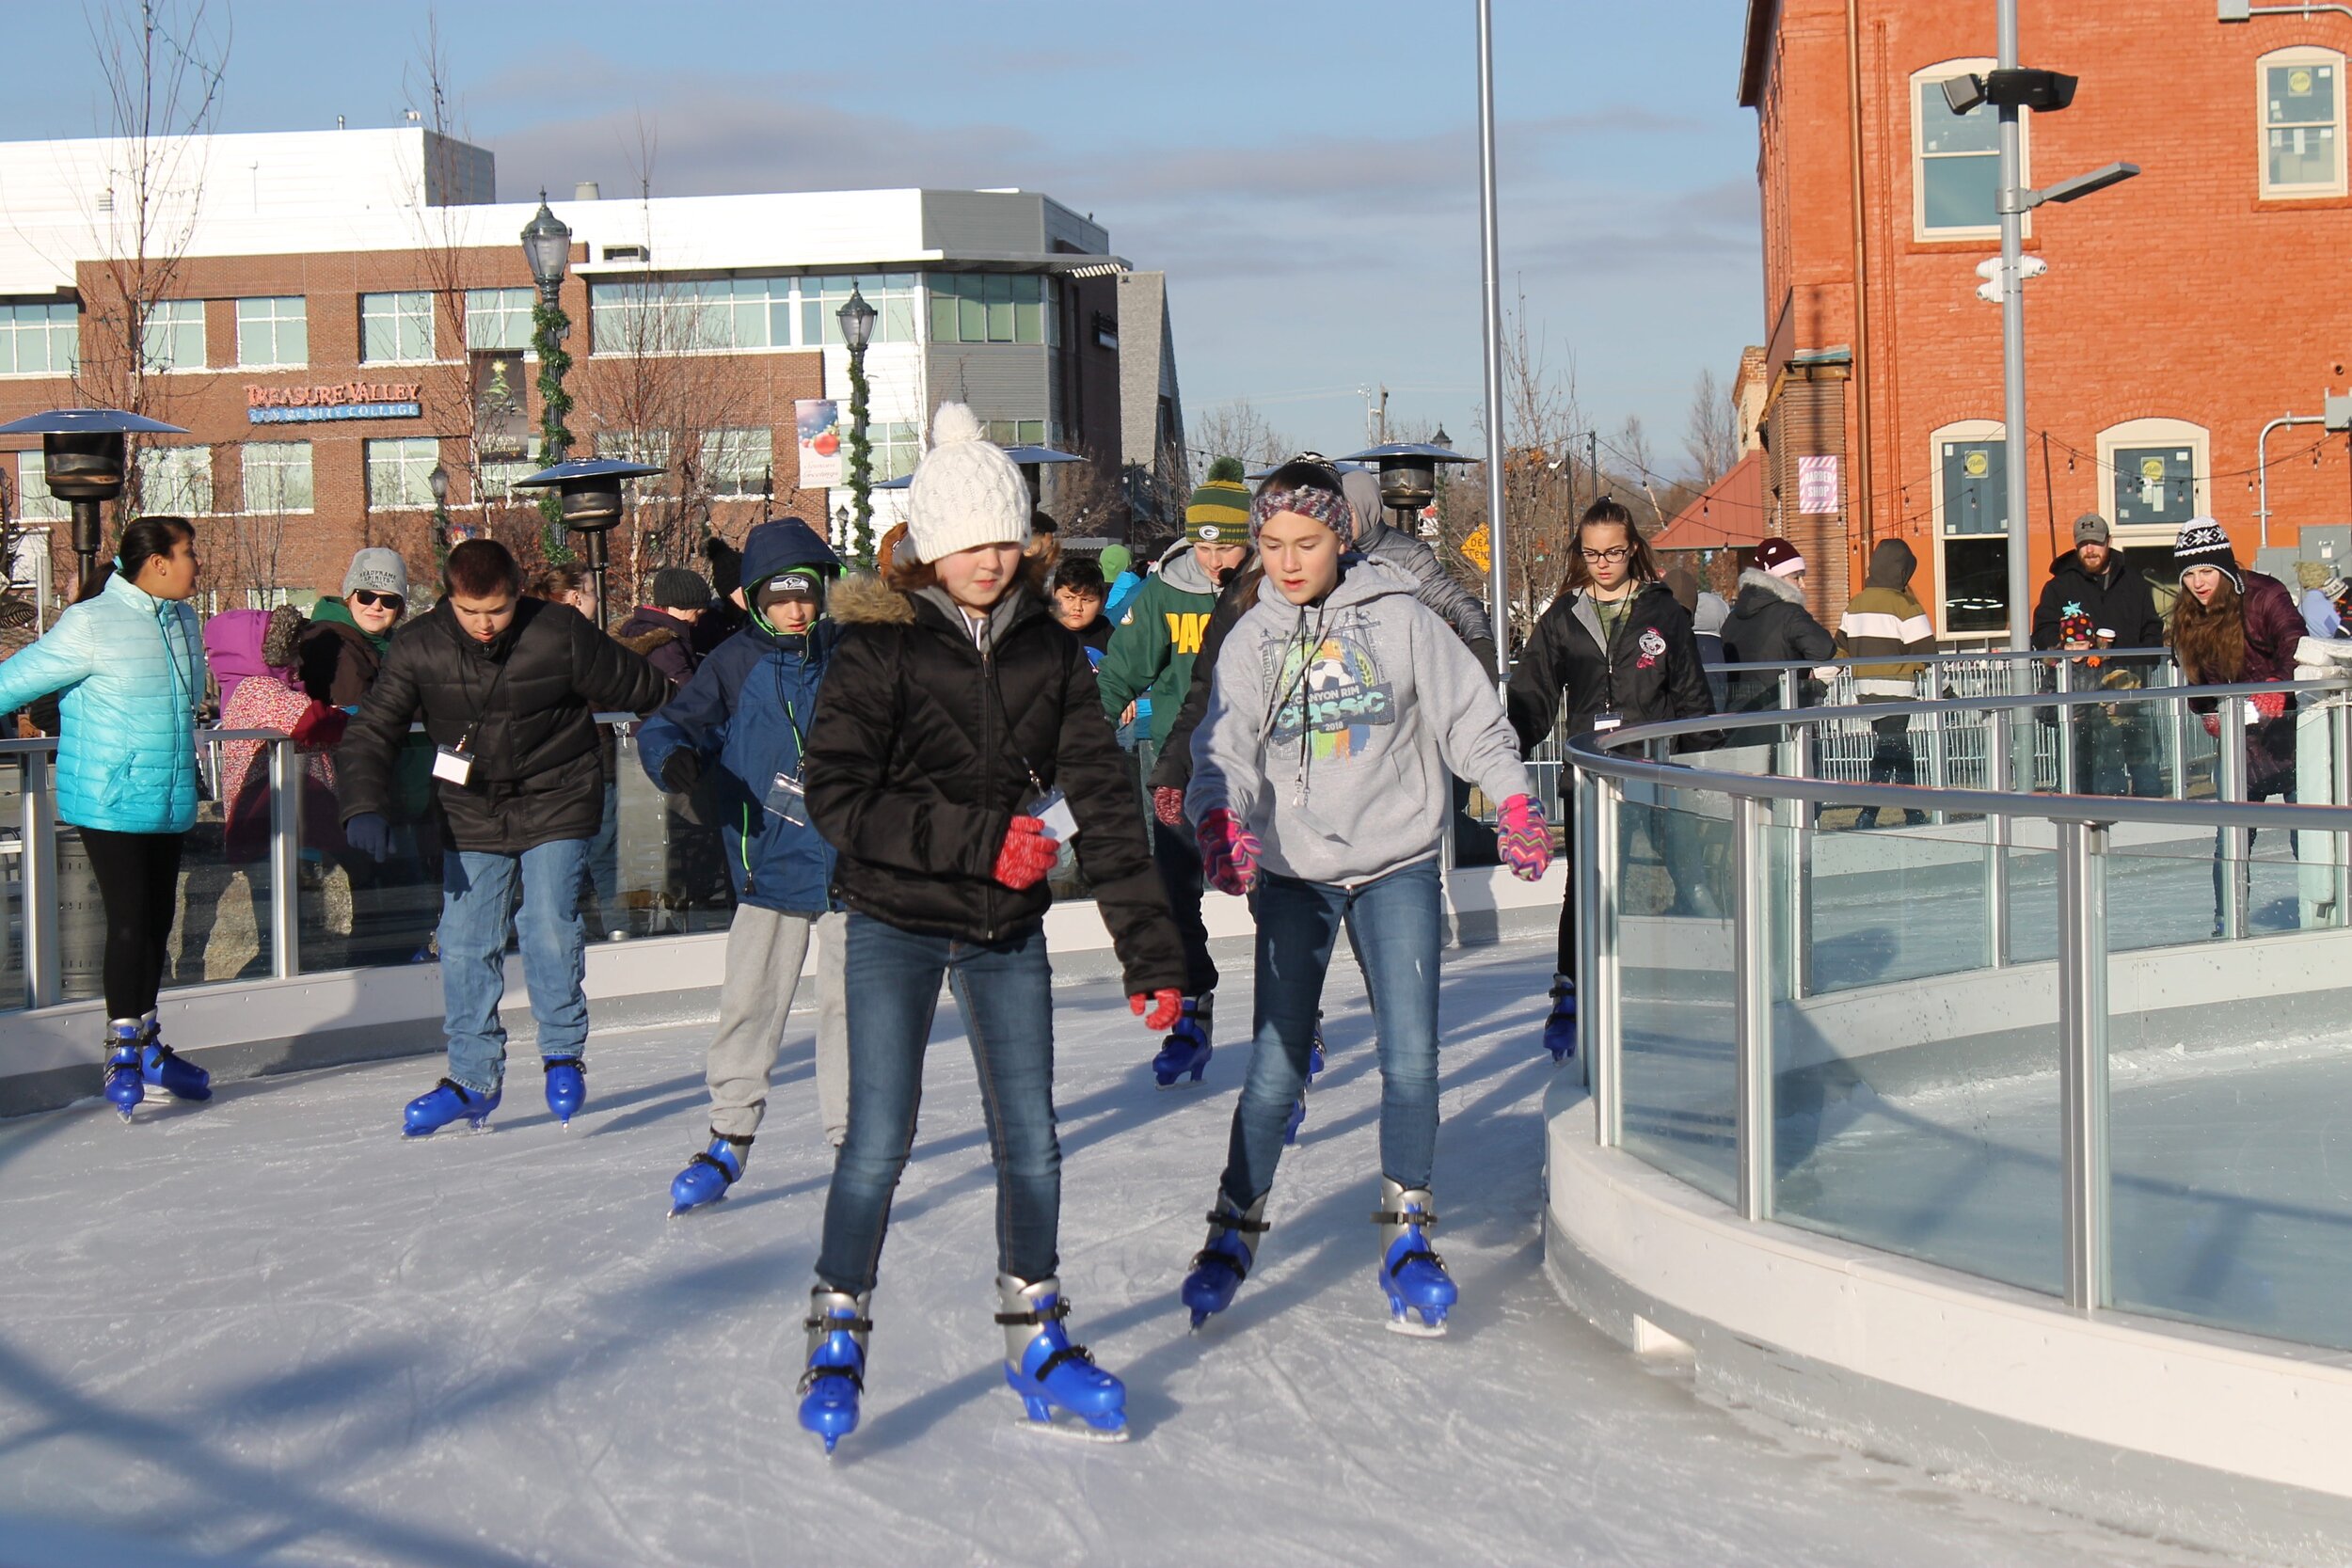 Free skate time allows students to practice the skills they learned